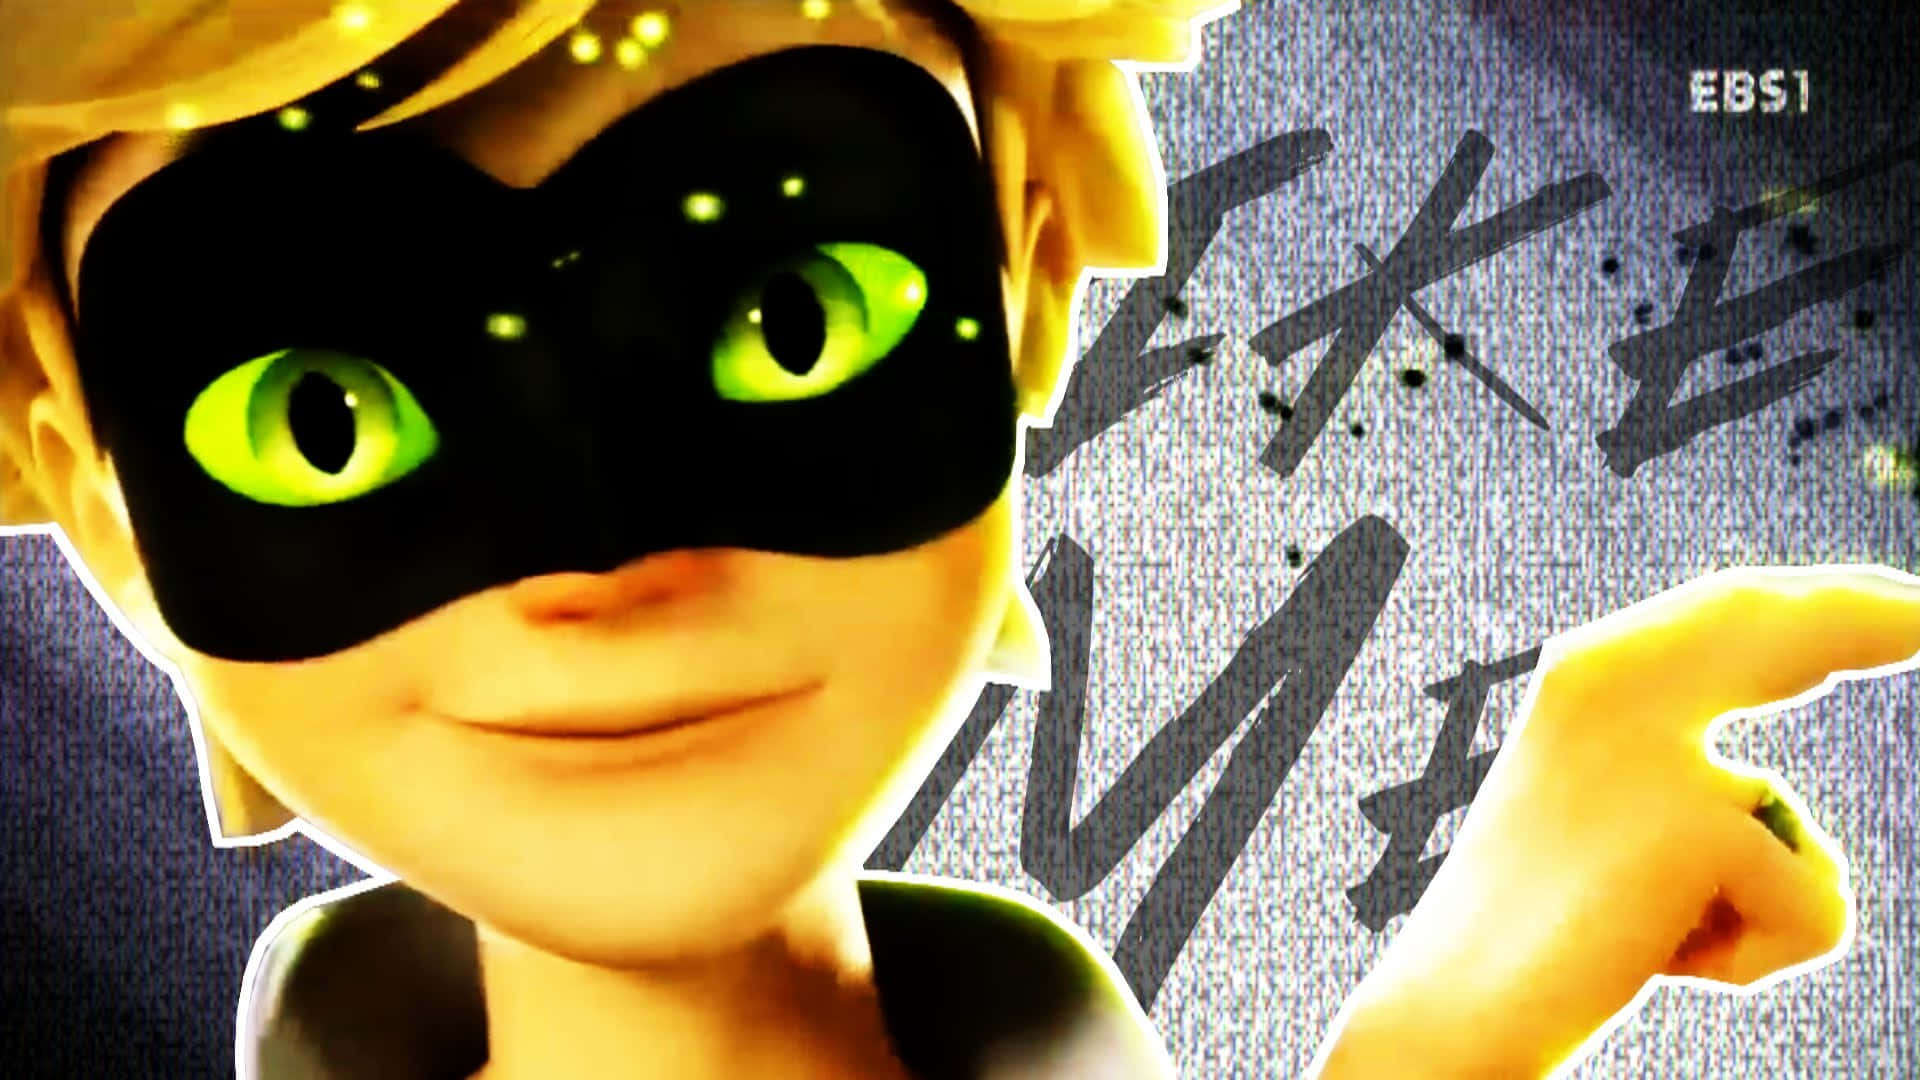 “The mysterious Chat Noir prowls at night” Wallpaper